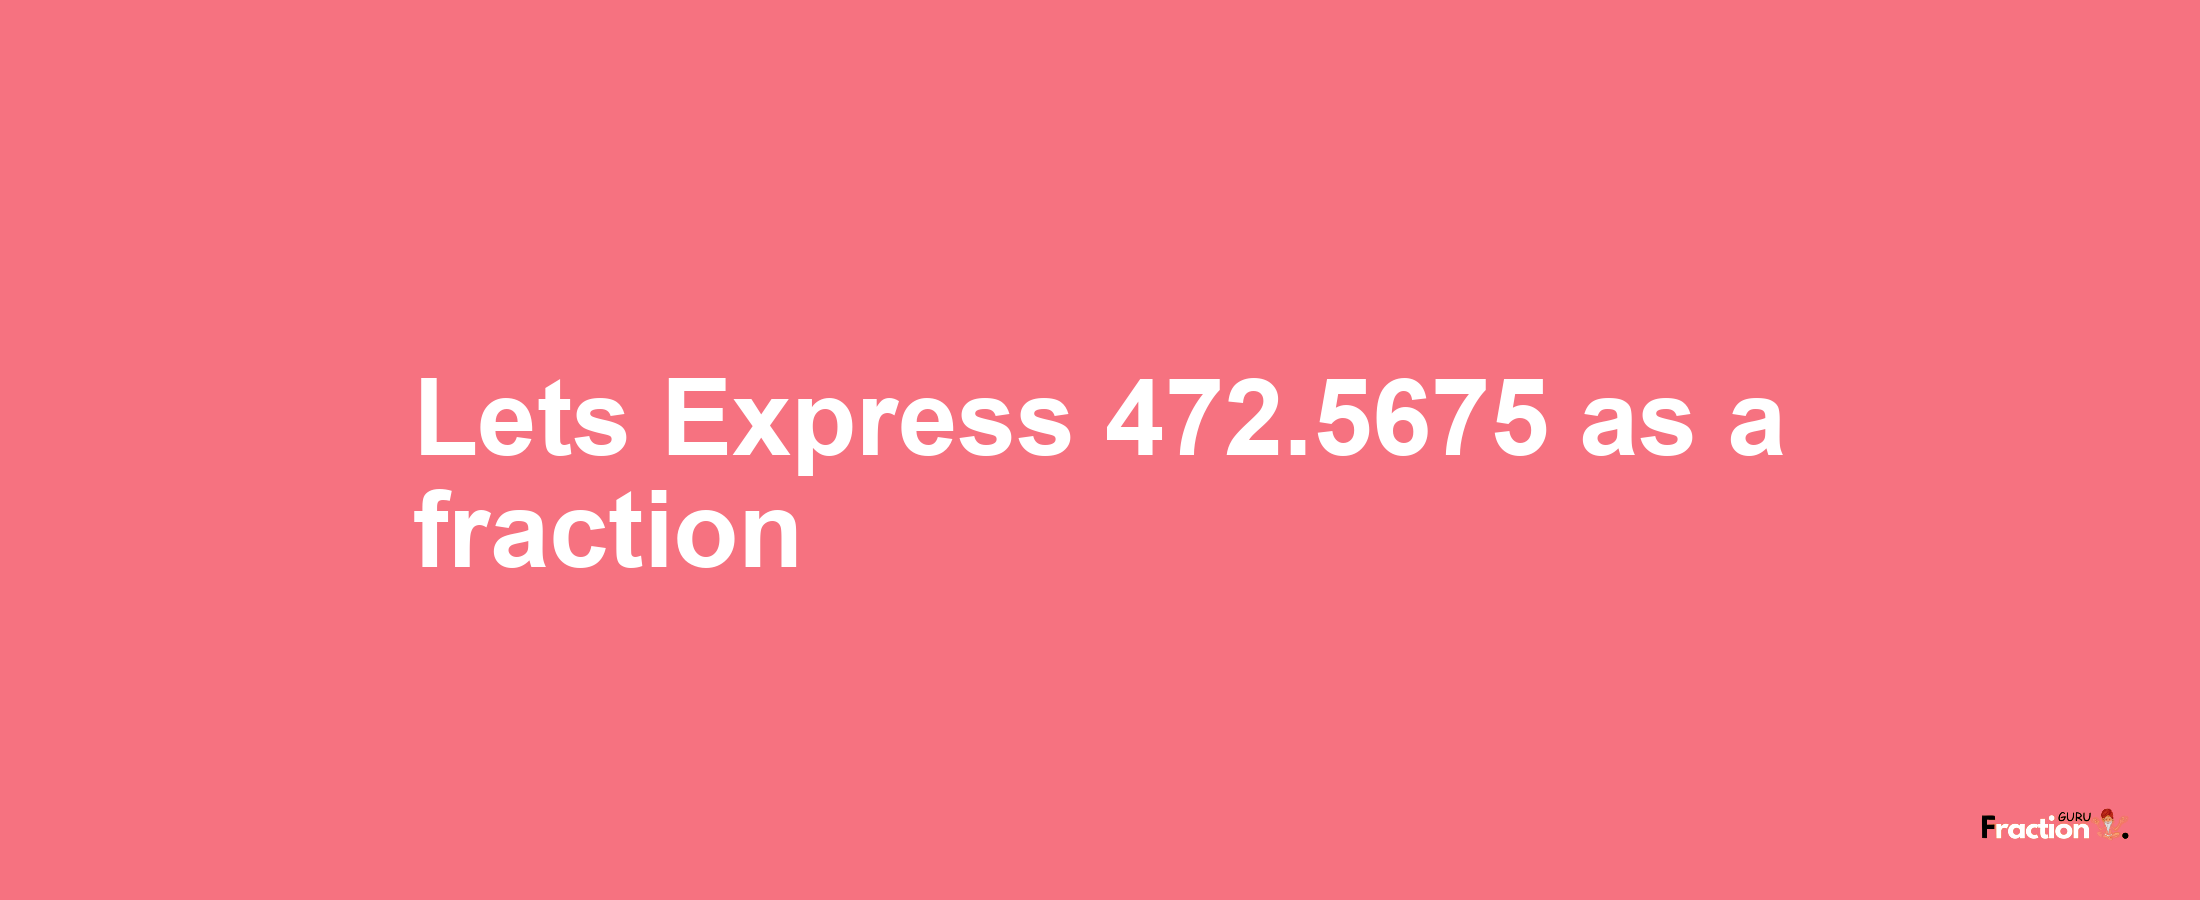 Lets Express 472.5675 as afraction